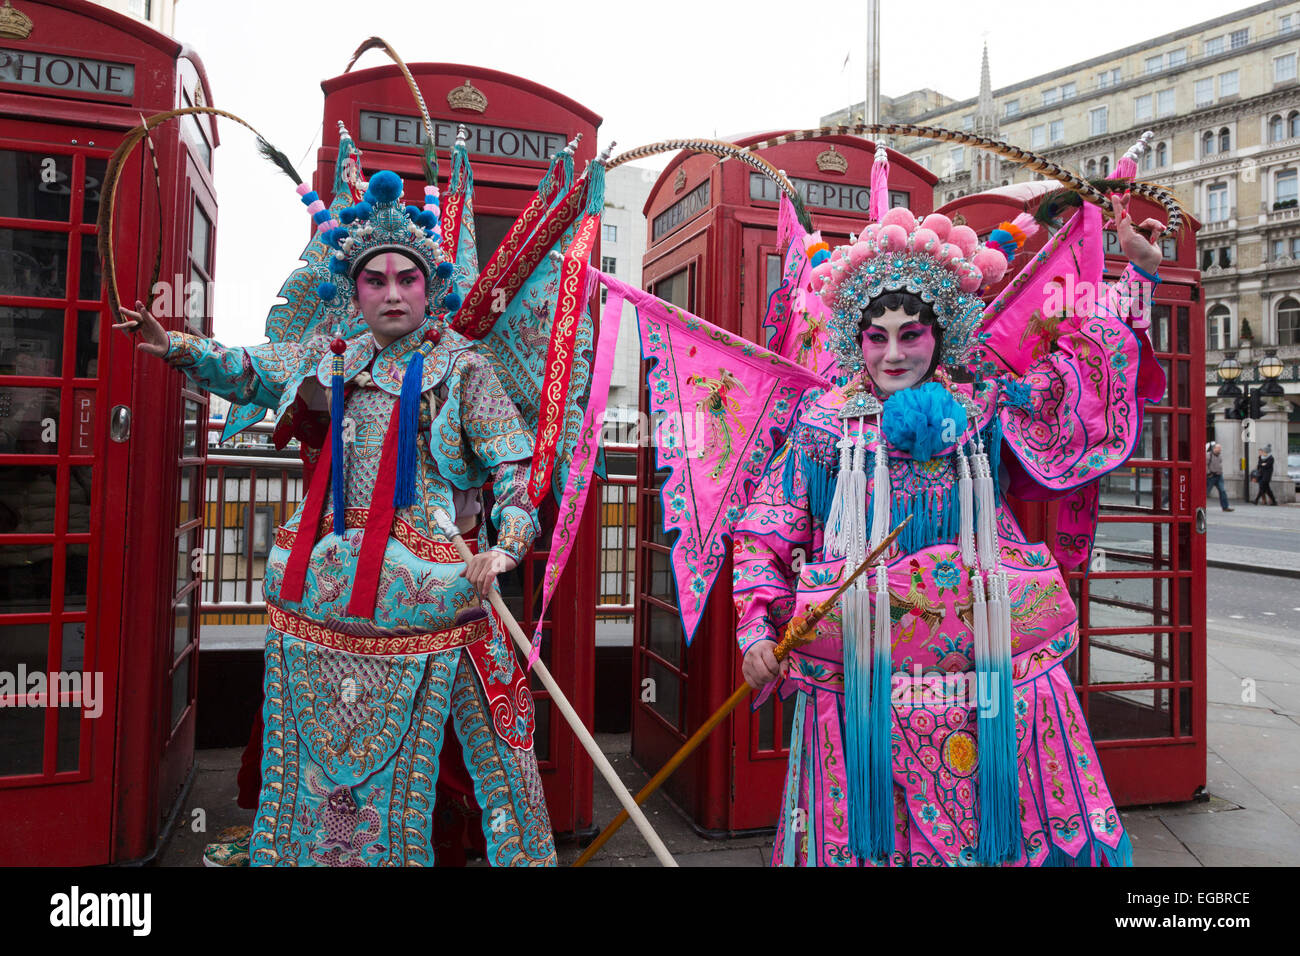 London, UK. 22nd February 2015. Costumed performers get ready for the Chinese New Year Parade along Charing Cross Road and Chinatown which traditionally kicks off the Chinese New Year's Celebrations in London. This year is the Year of the Sheep. Credit:  Nick Savage/Alamy Live News Stock Photo